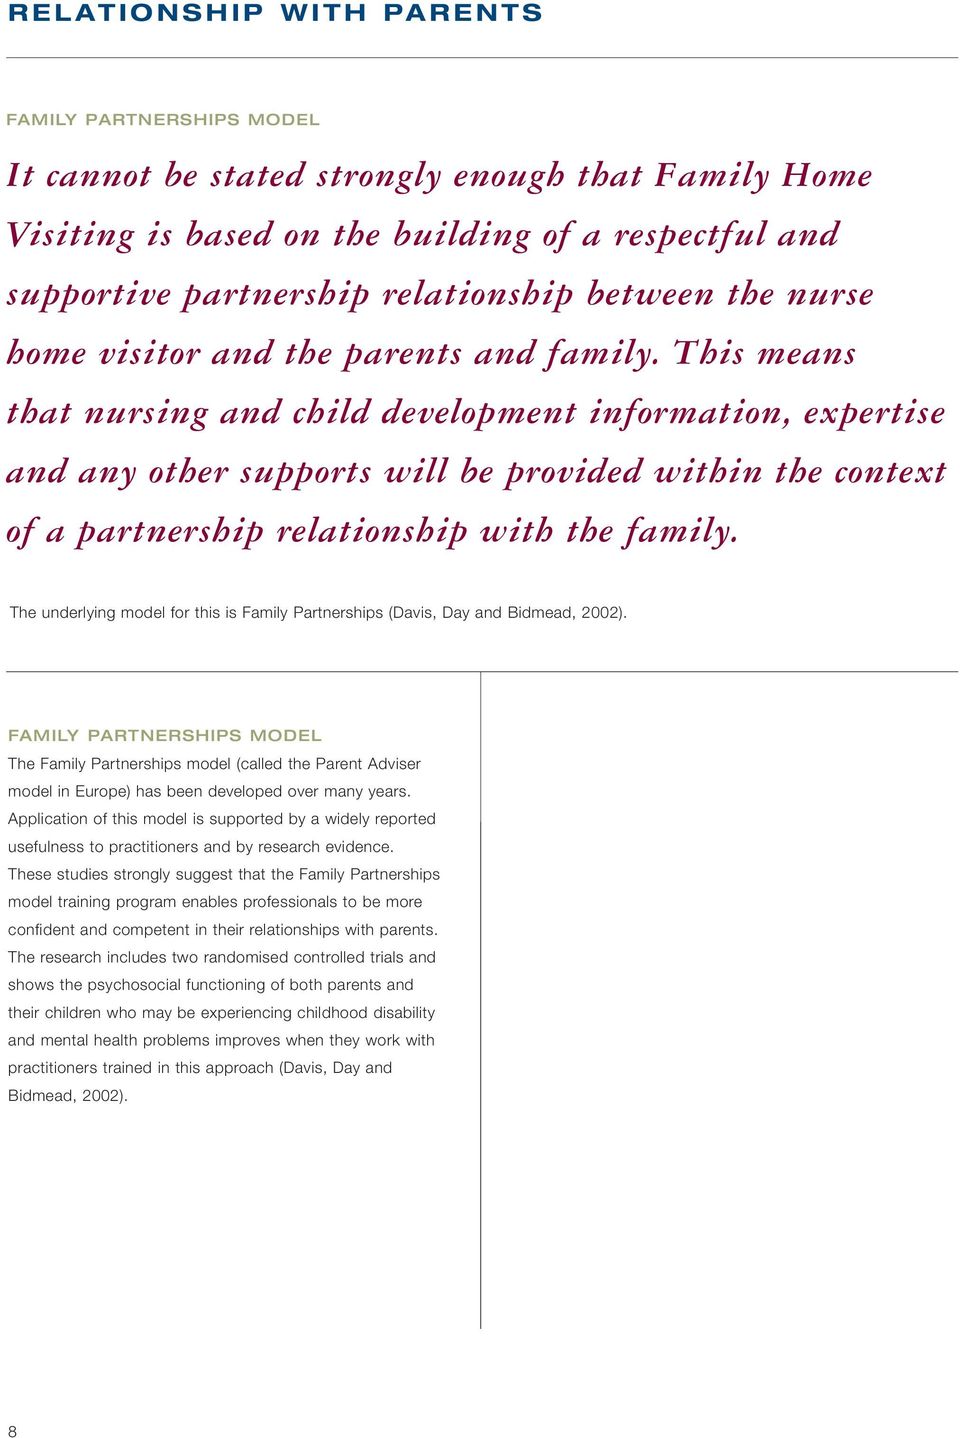 This means that nursing and child development information, expertise and any other supports will be provided within the context of a partnership relationship with the family.